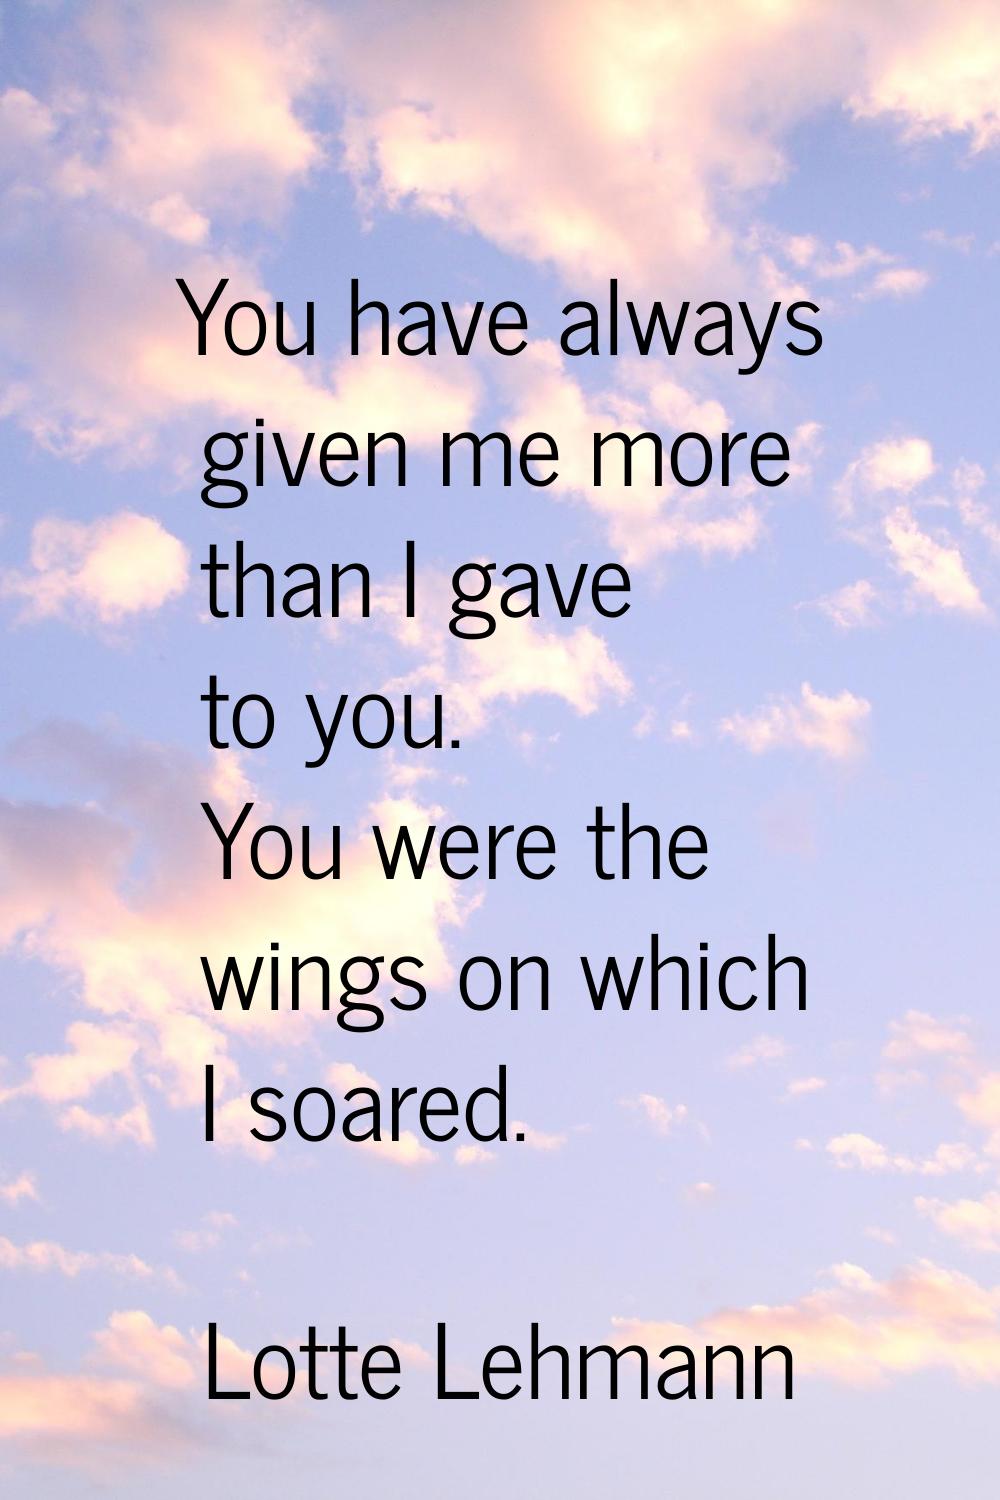 You have always given me more than I gave to you. You were the wings on which I soared.